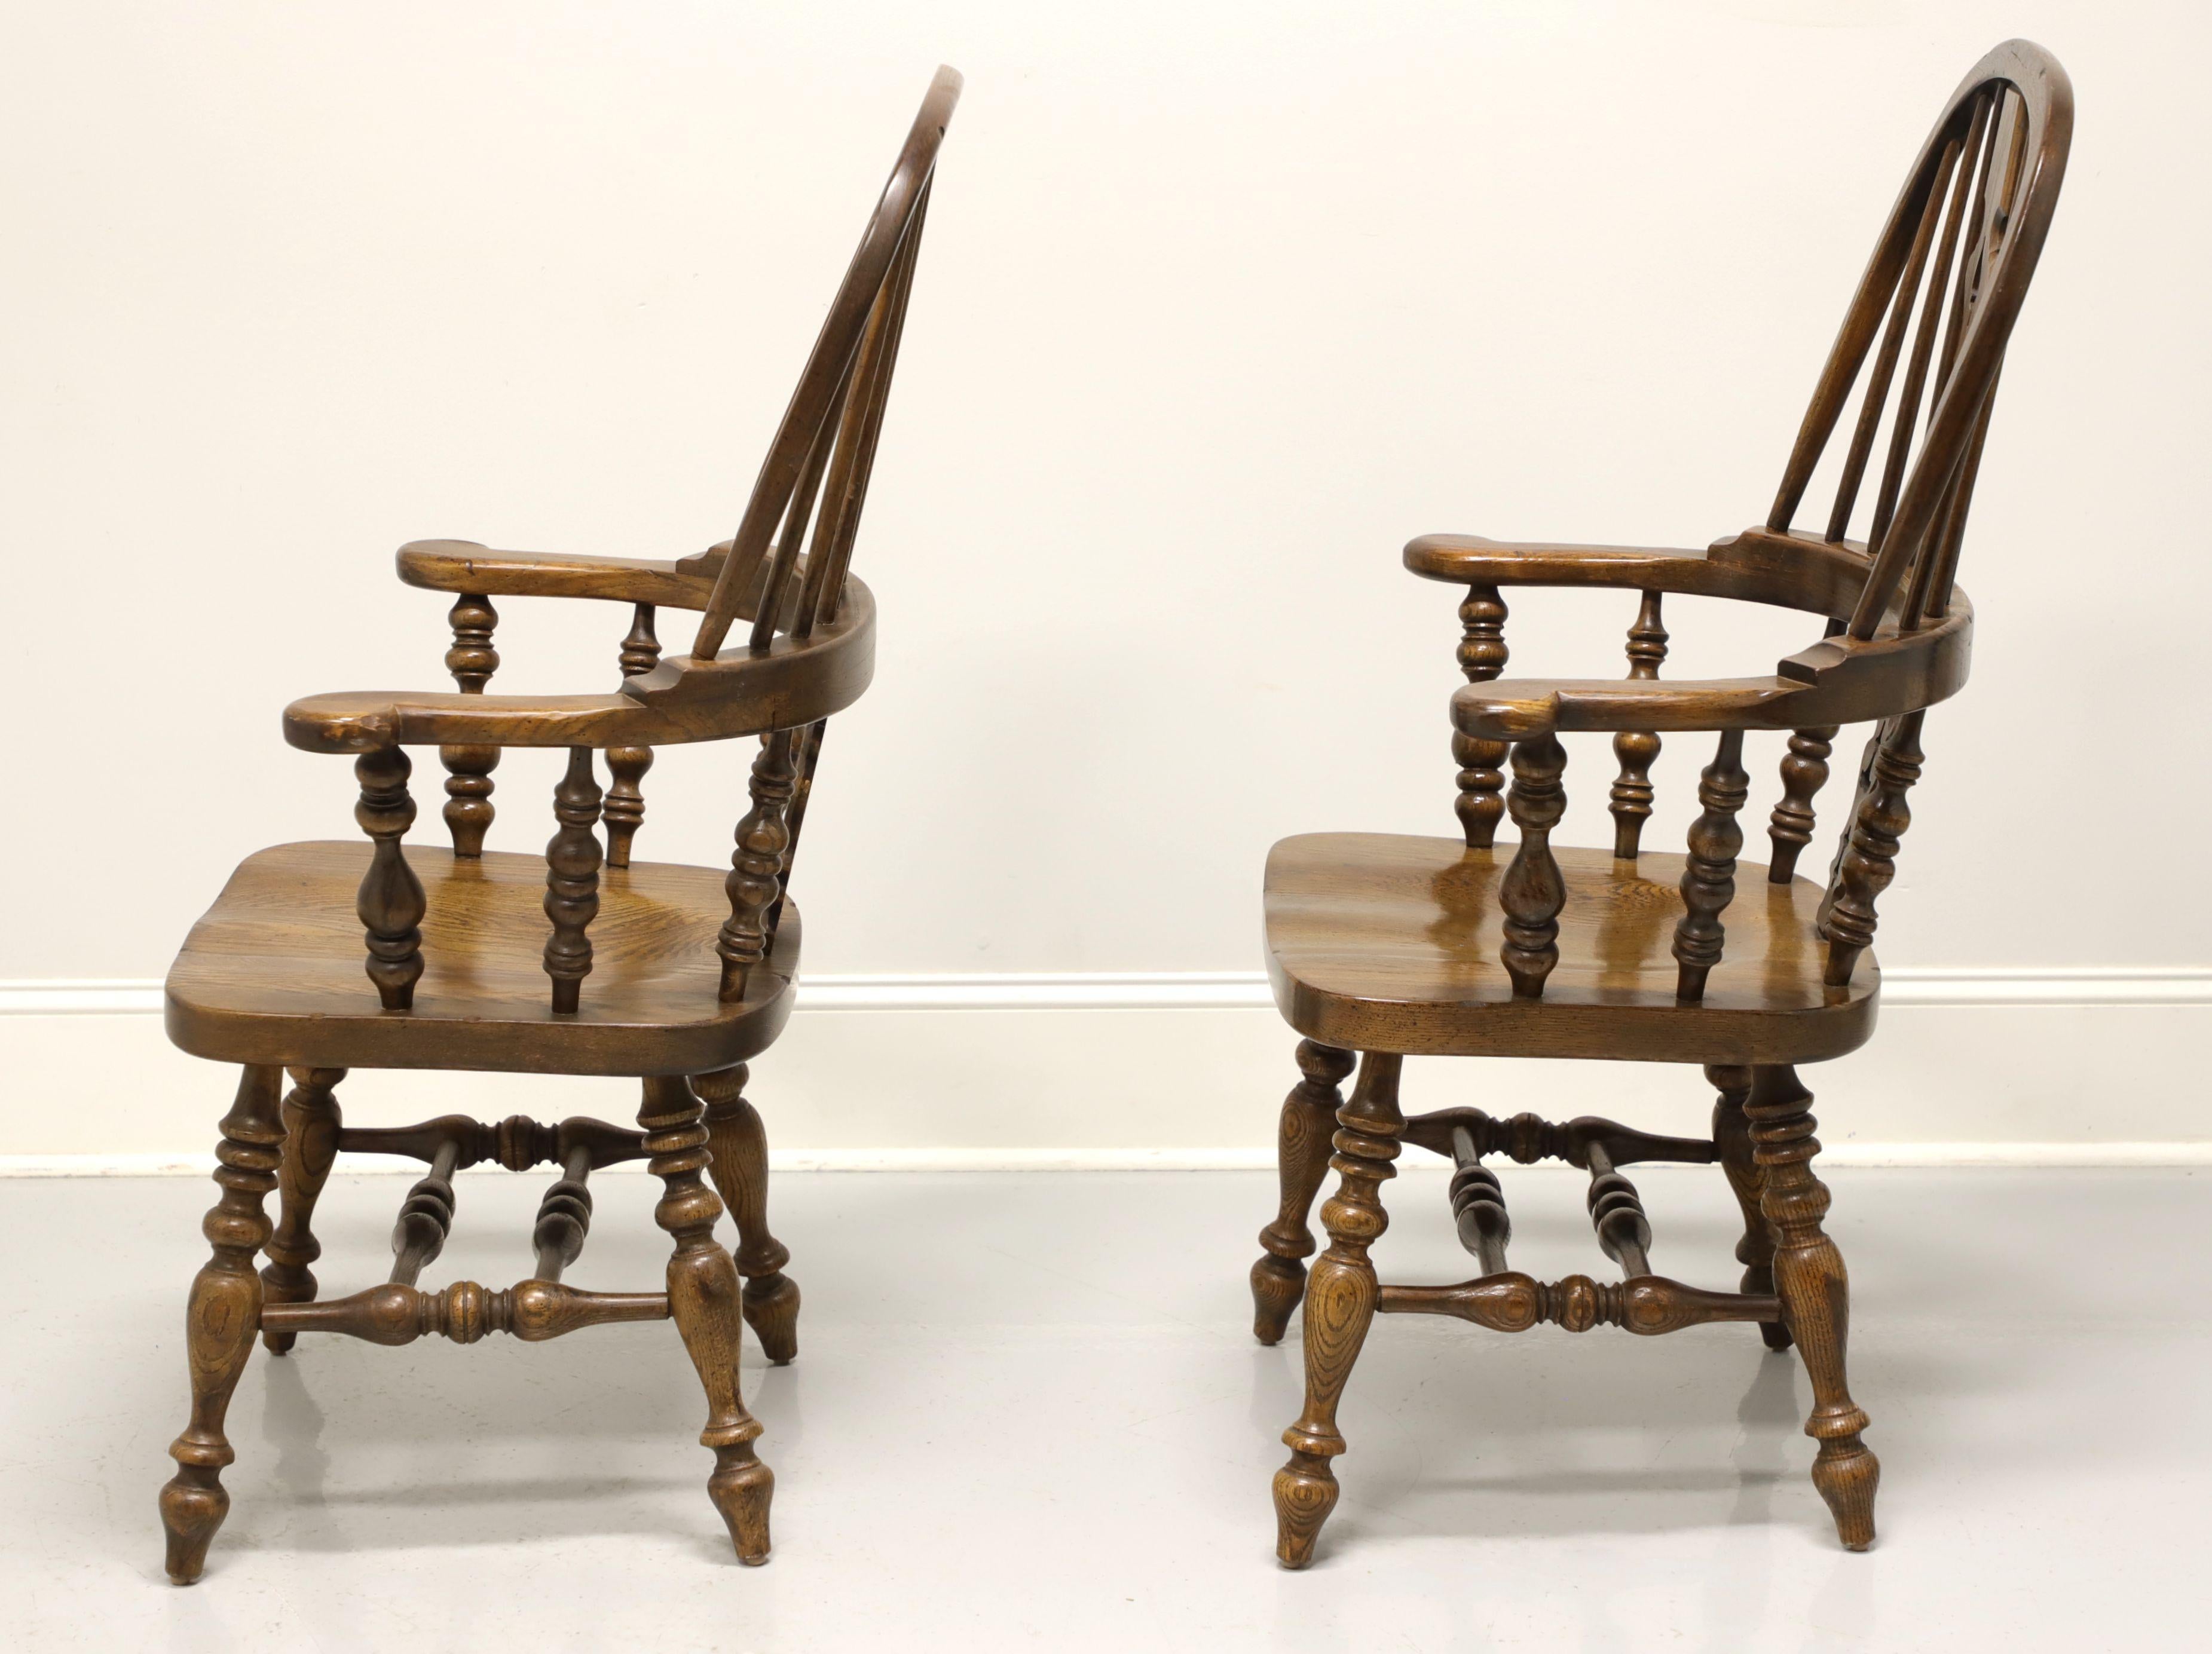 Other ETHAN ALLEN Royal Charter Oak Bowback Windsor Dining Armchairs - Pair